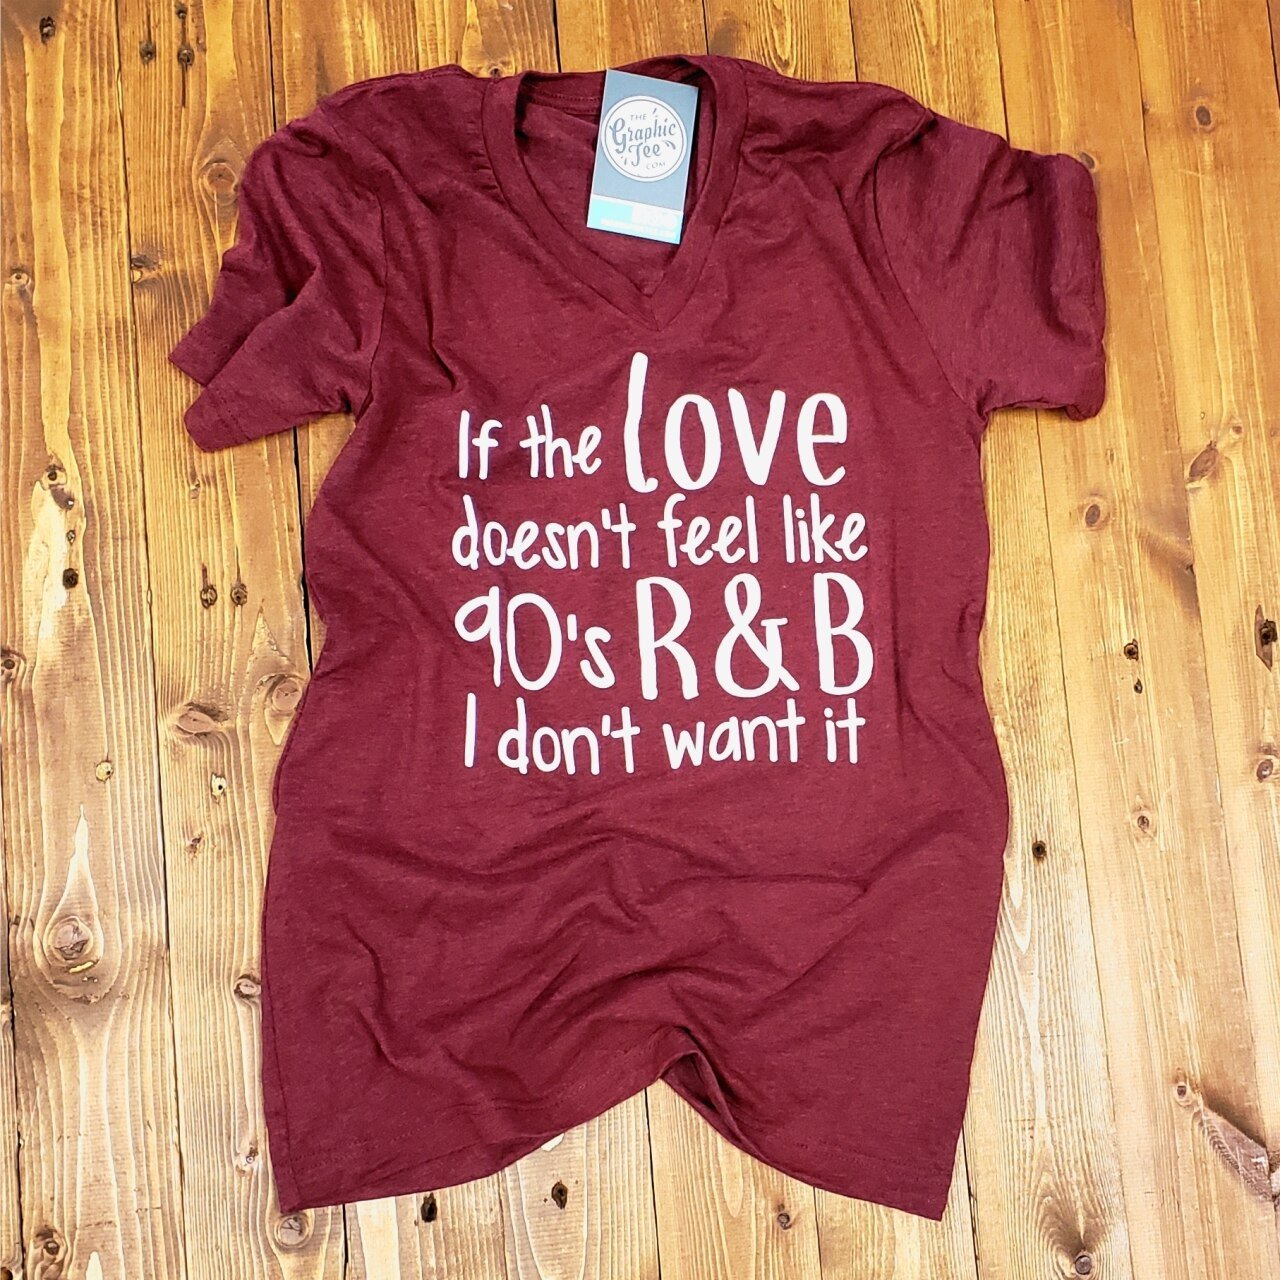 If the Love Doesn't Feel Like 90's R&B I Don't Want It - V-Neck Tee - The Graphic Tee